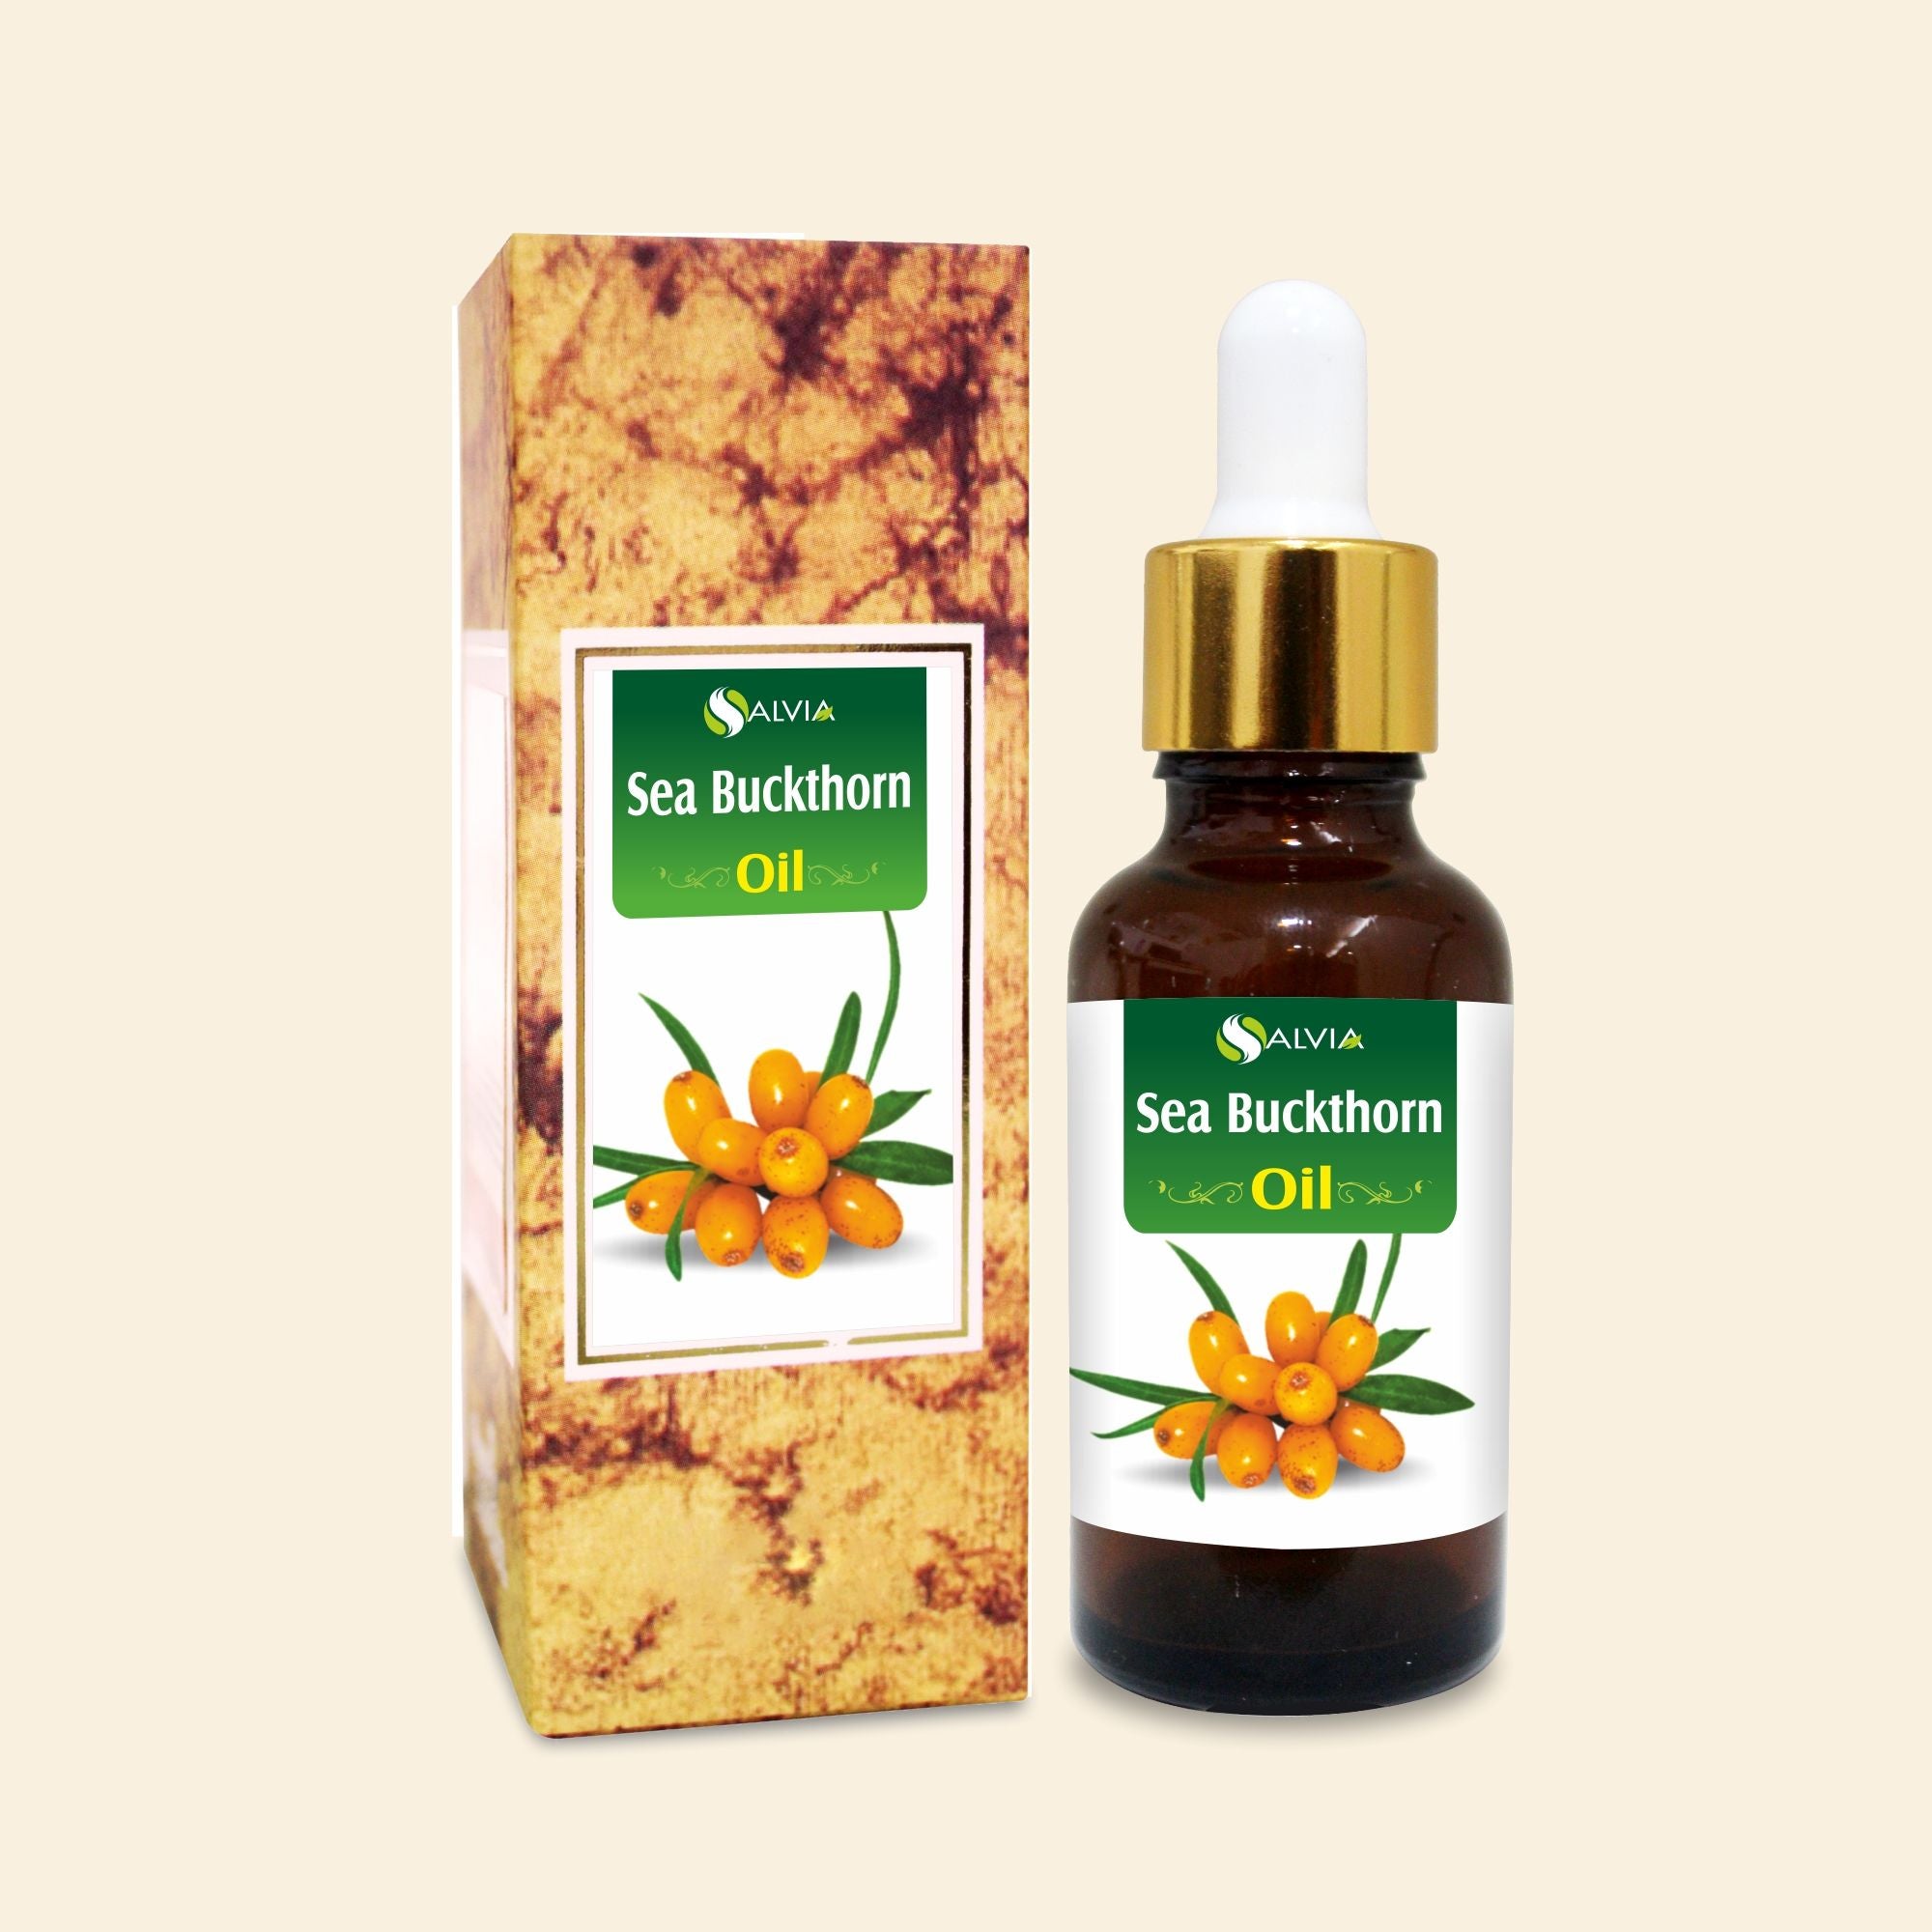 Salvia Natural Carrier Oils Sea Buckthorn (Hippophae Rhamnoides) Oil 100% Pure & Natural Carrier Oil Supports Wound Healing, Diminishes Scars, Improves Skin Elasticity